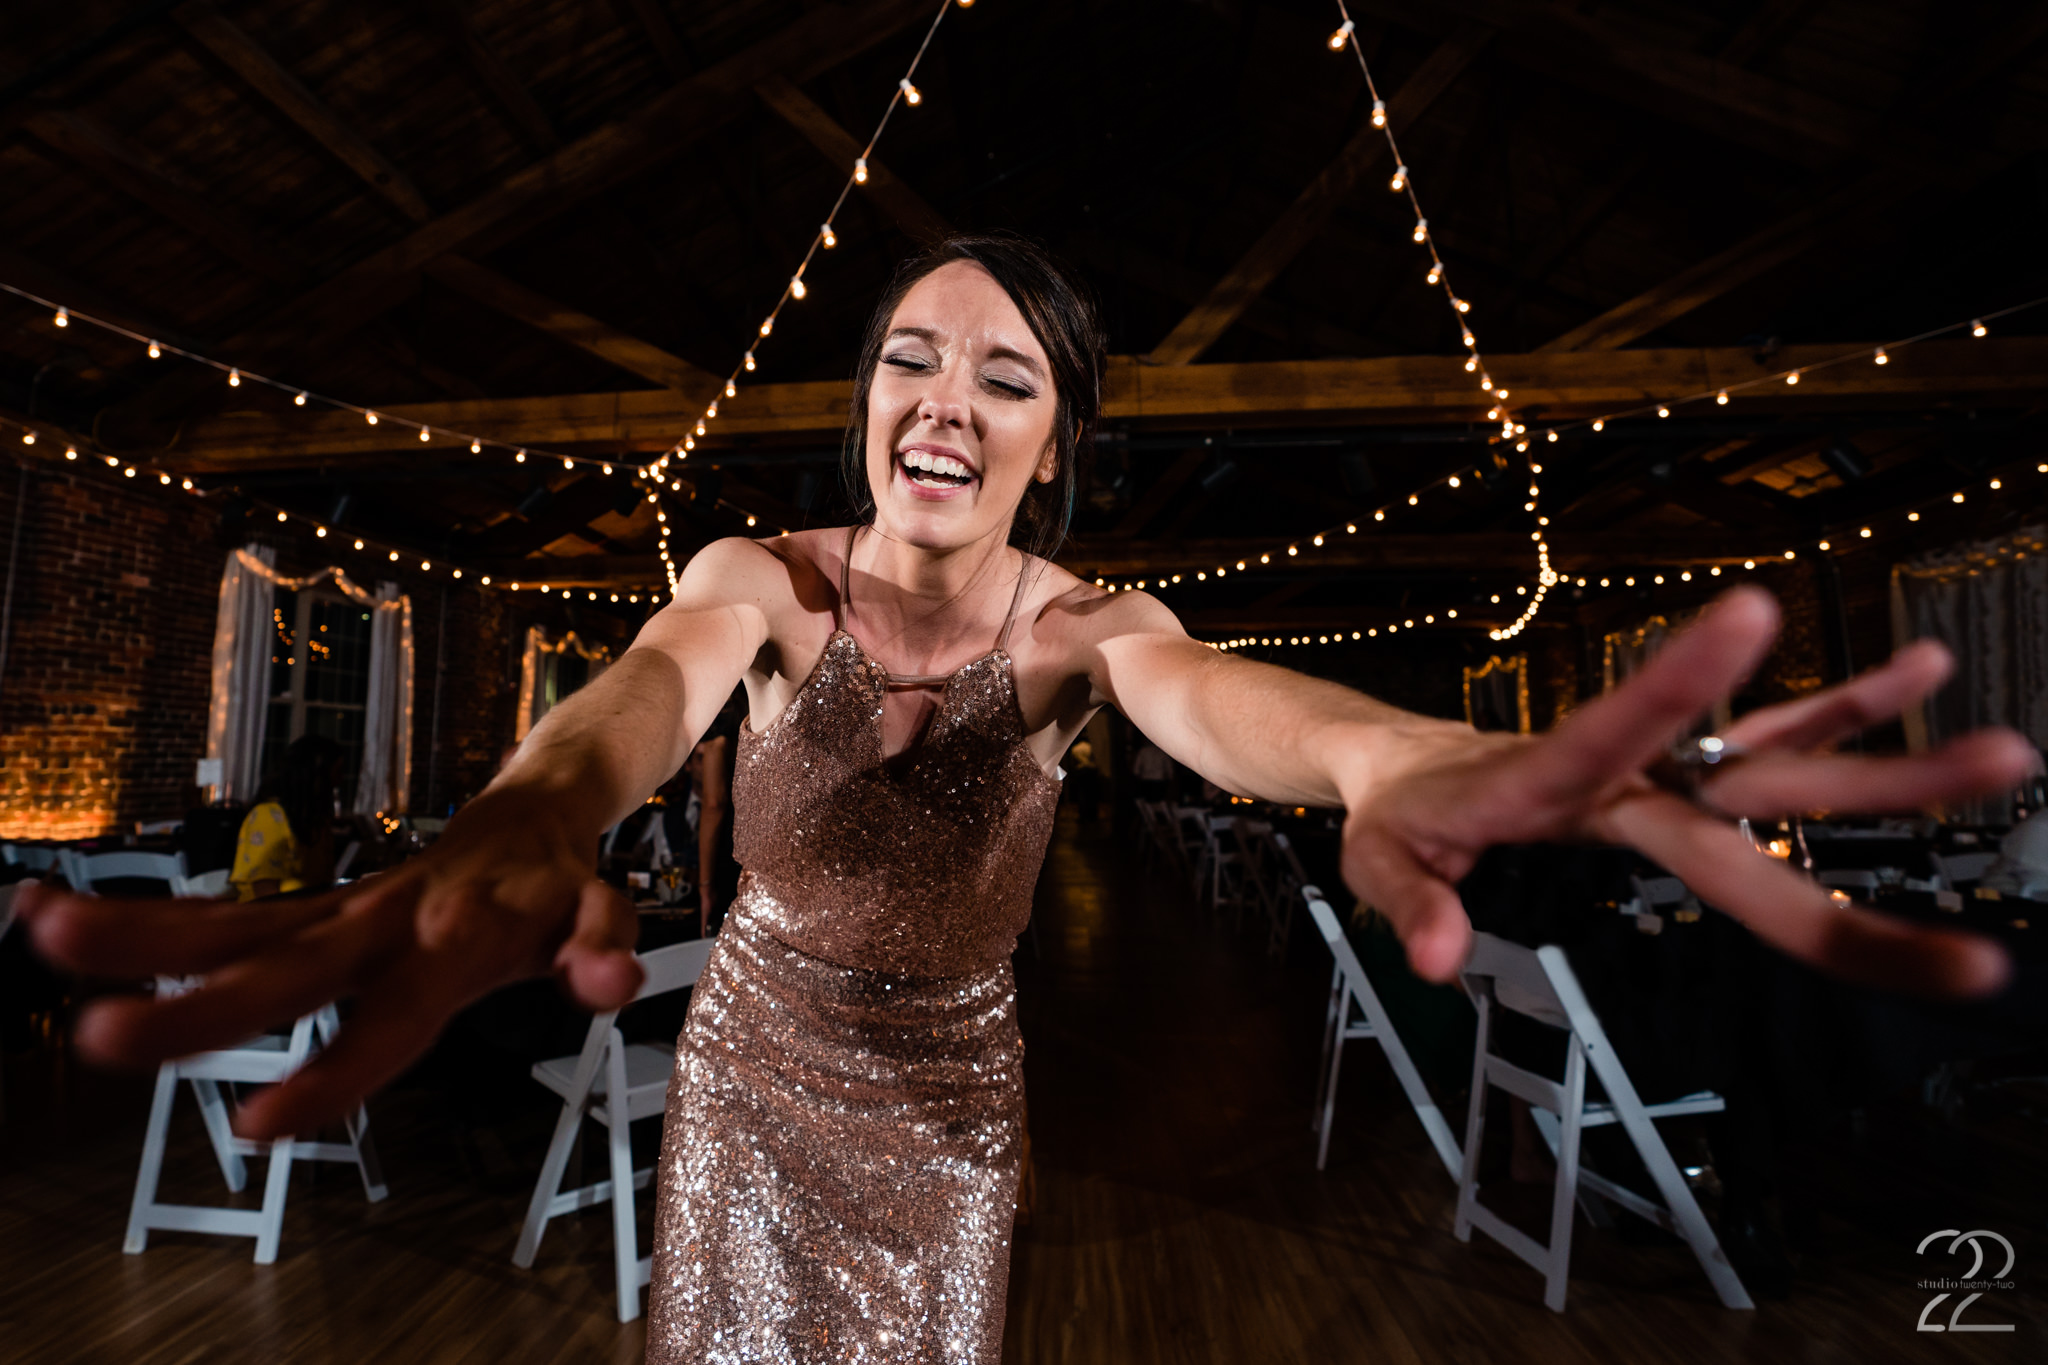  Megan at Studio 22 Photography loves to get in close to capture the action, but don’t worry we guarantee you will forget she is there and your guests will love watching her lay on the floor or climb on chairs. 